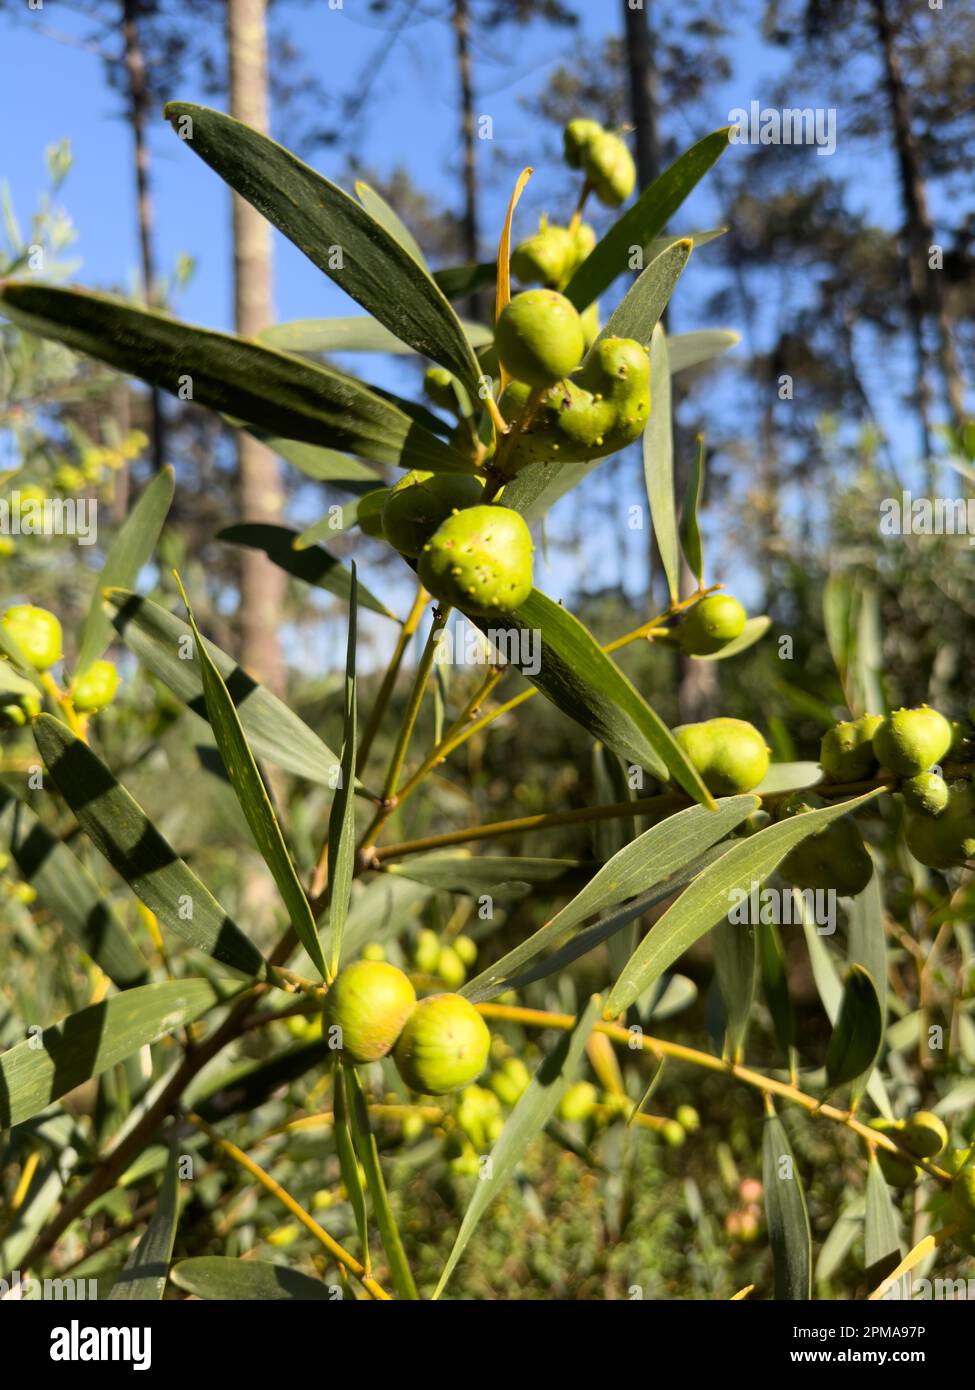 Galls produced on the flower buds of an Acacia Longifolia by the insect Trichilogaster acaciaelongifoliae. Stock Photo